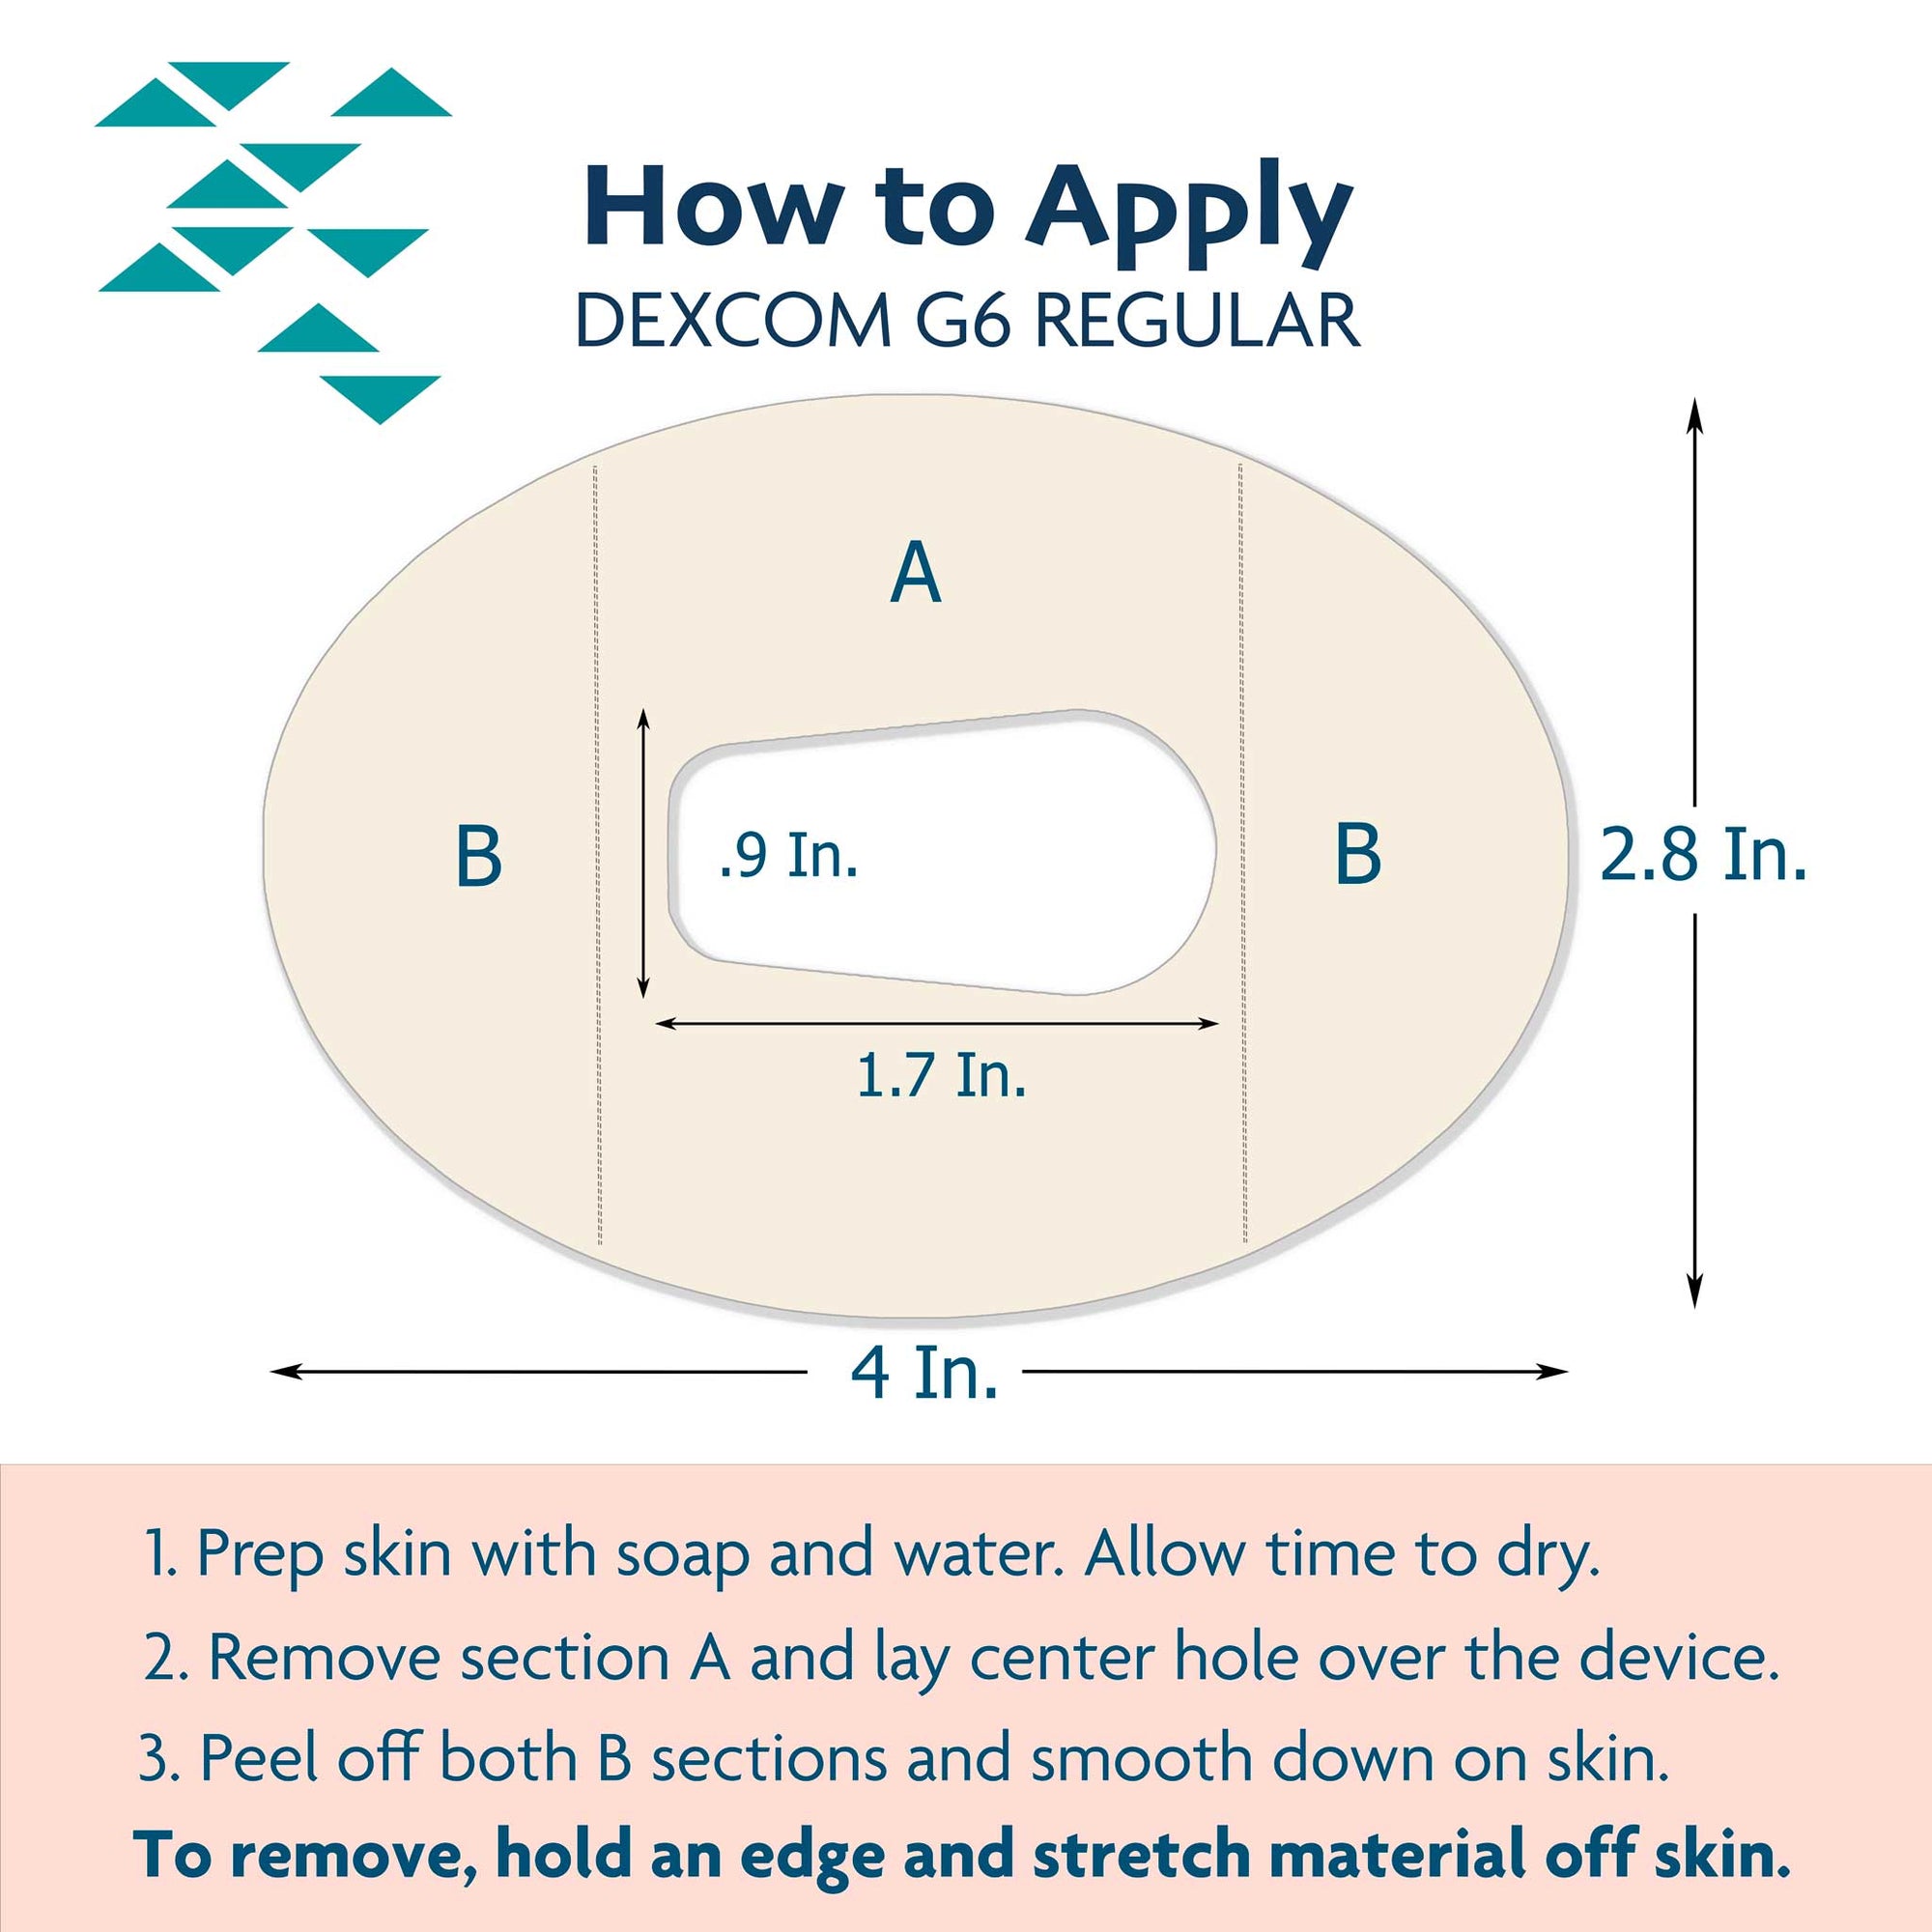 ExpressionMed How to properly apply your new dexcom g6 cover securely